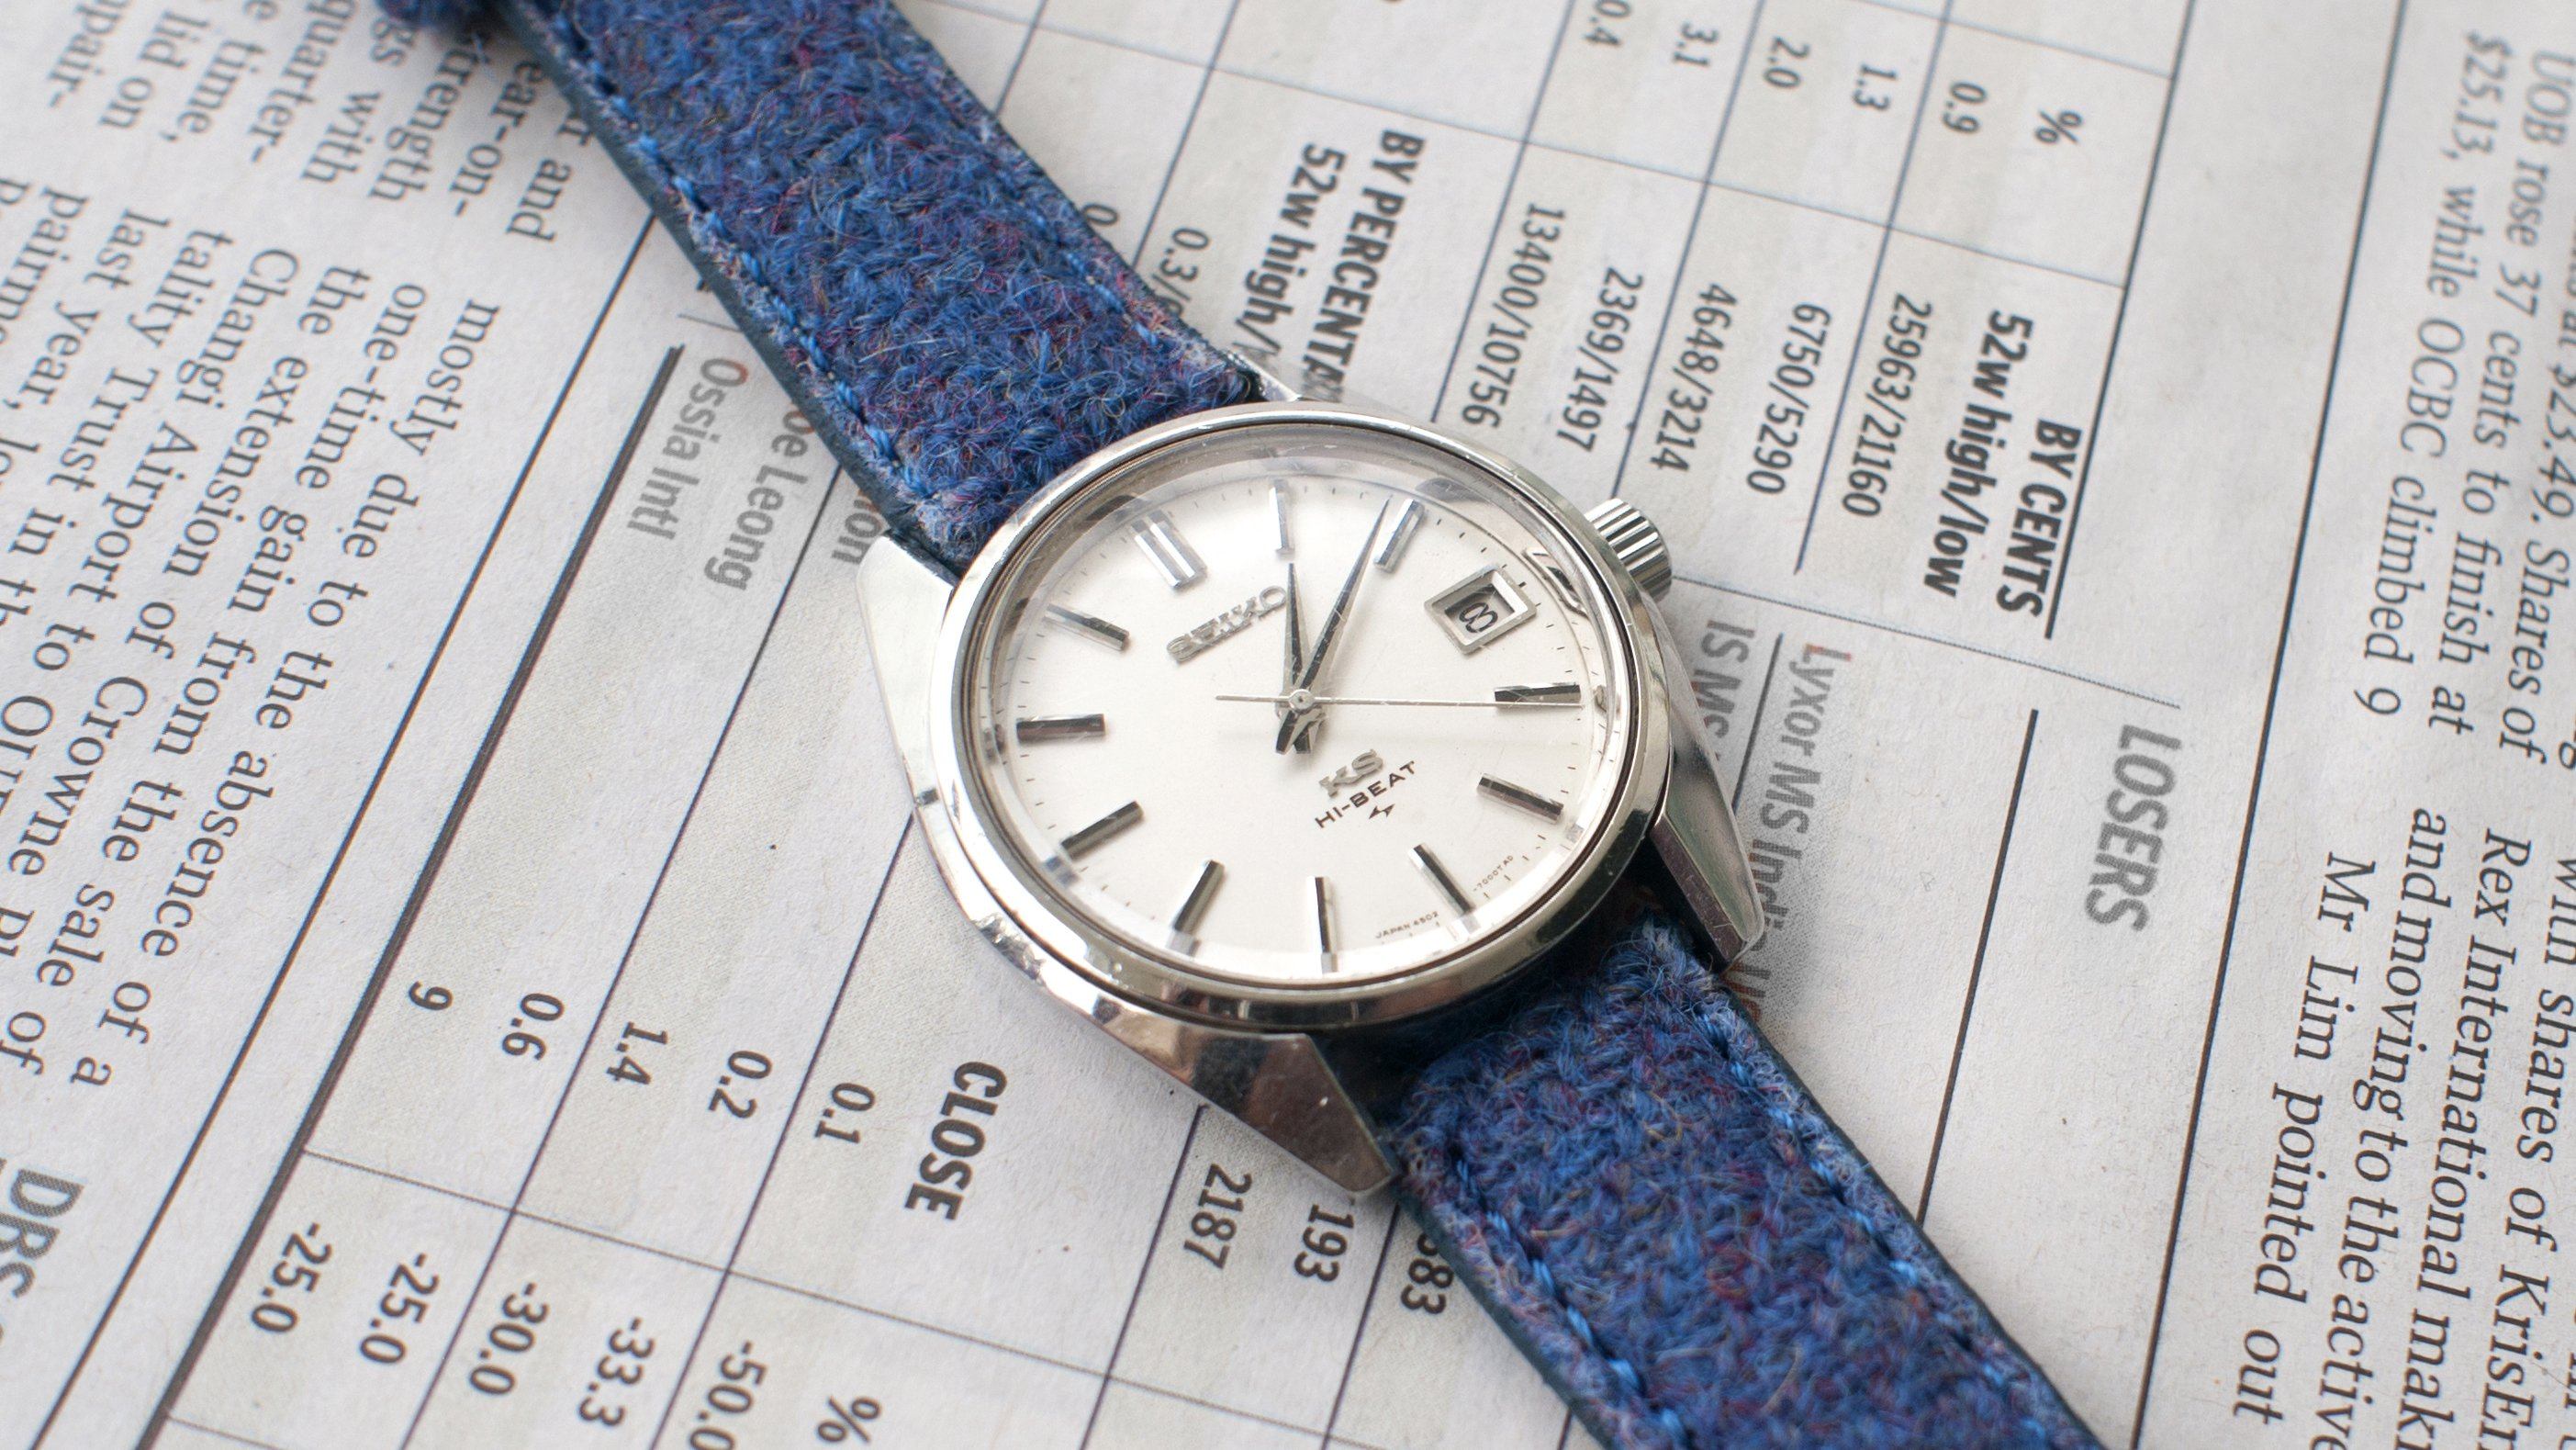 Watch Collecting on A Moderate Budget | VARIO